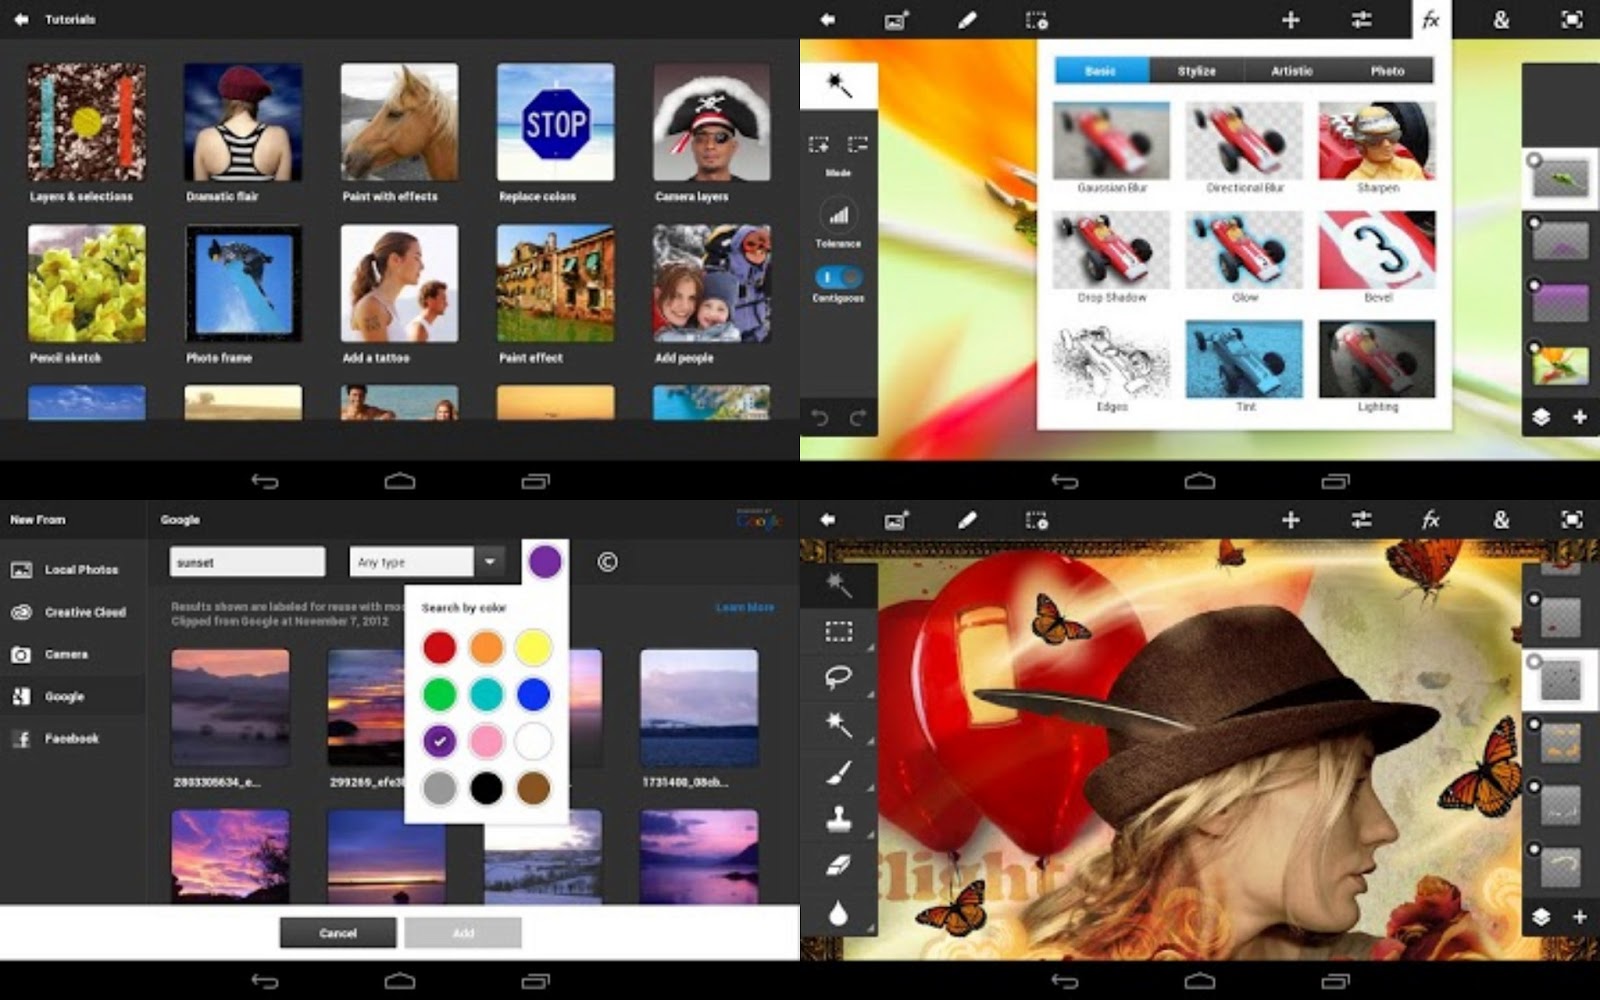 pc games android: Adobe Photoshop Touch v1.4.1